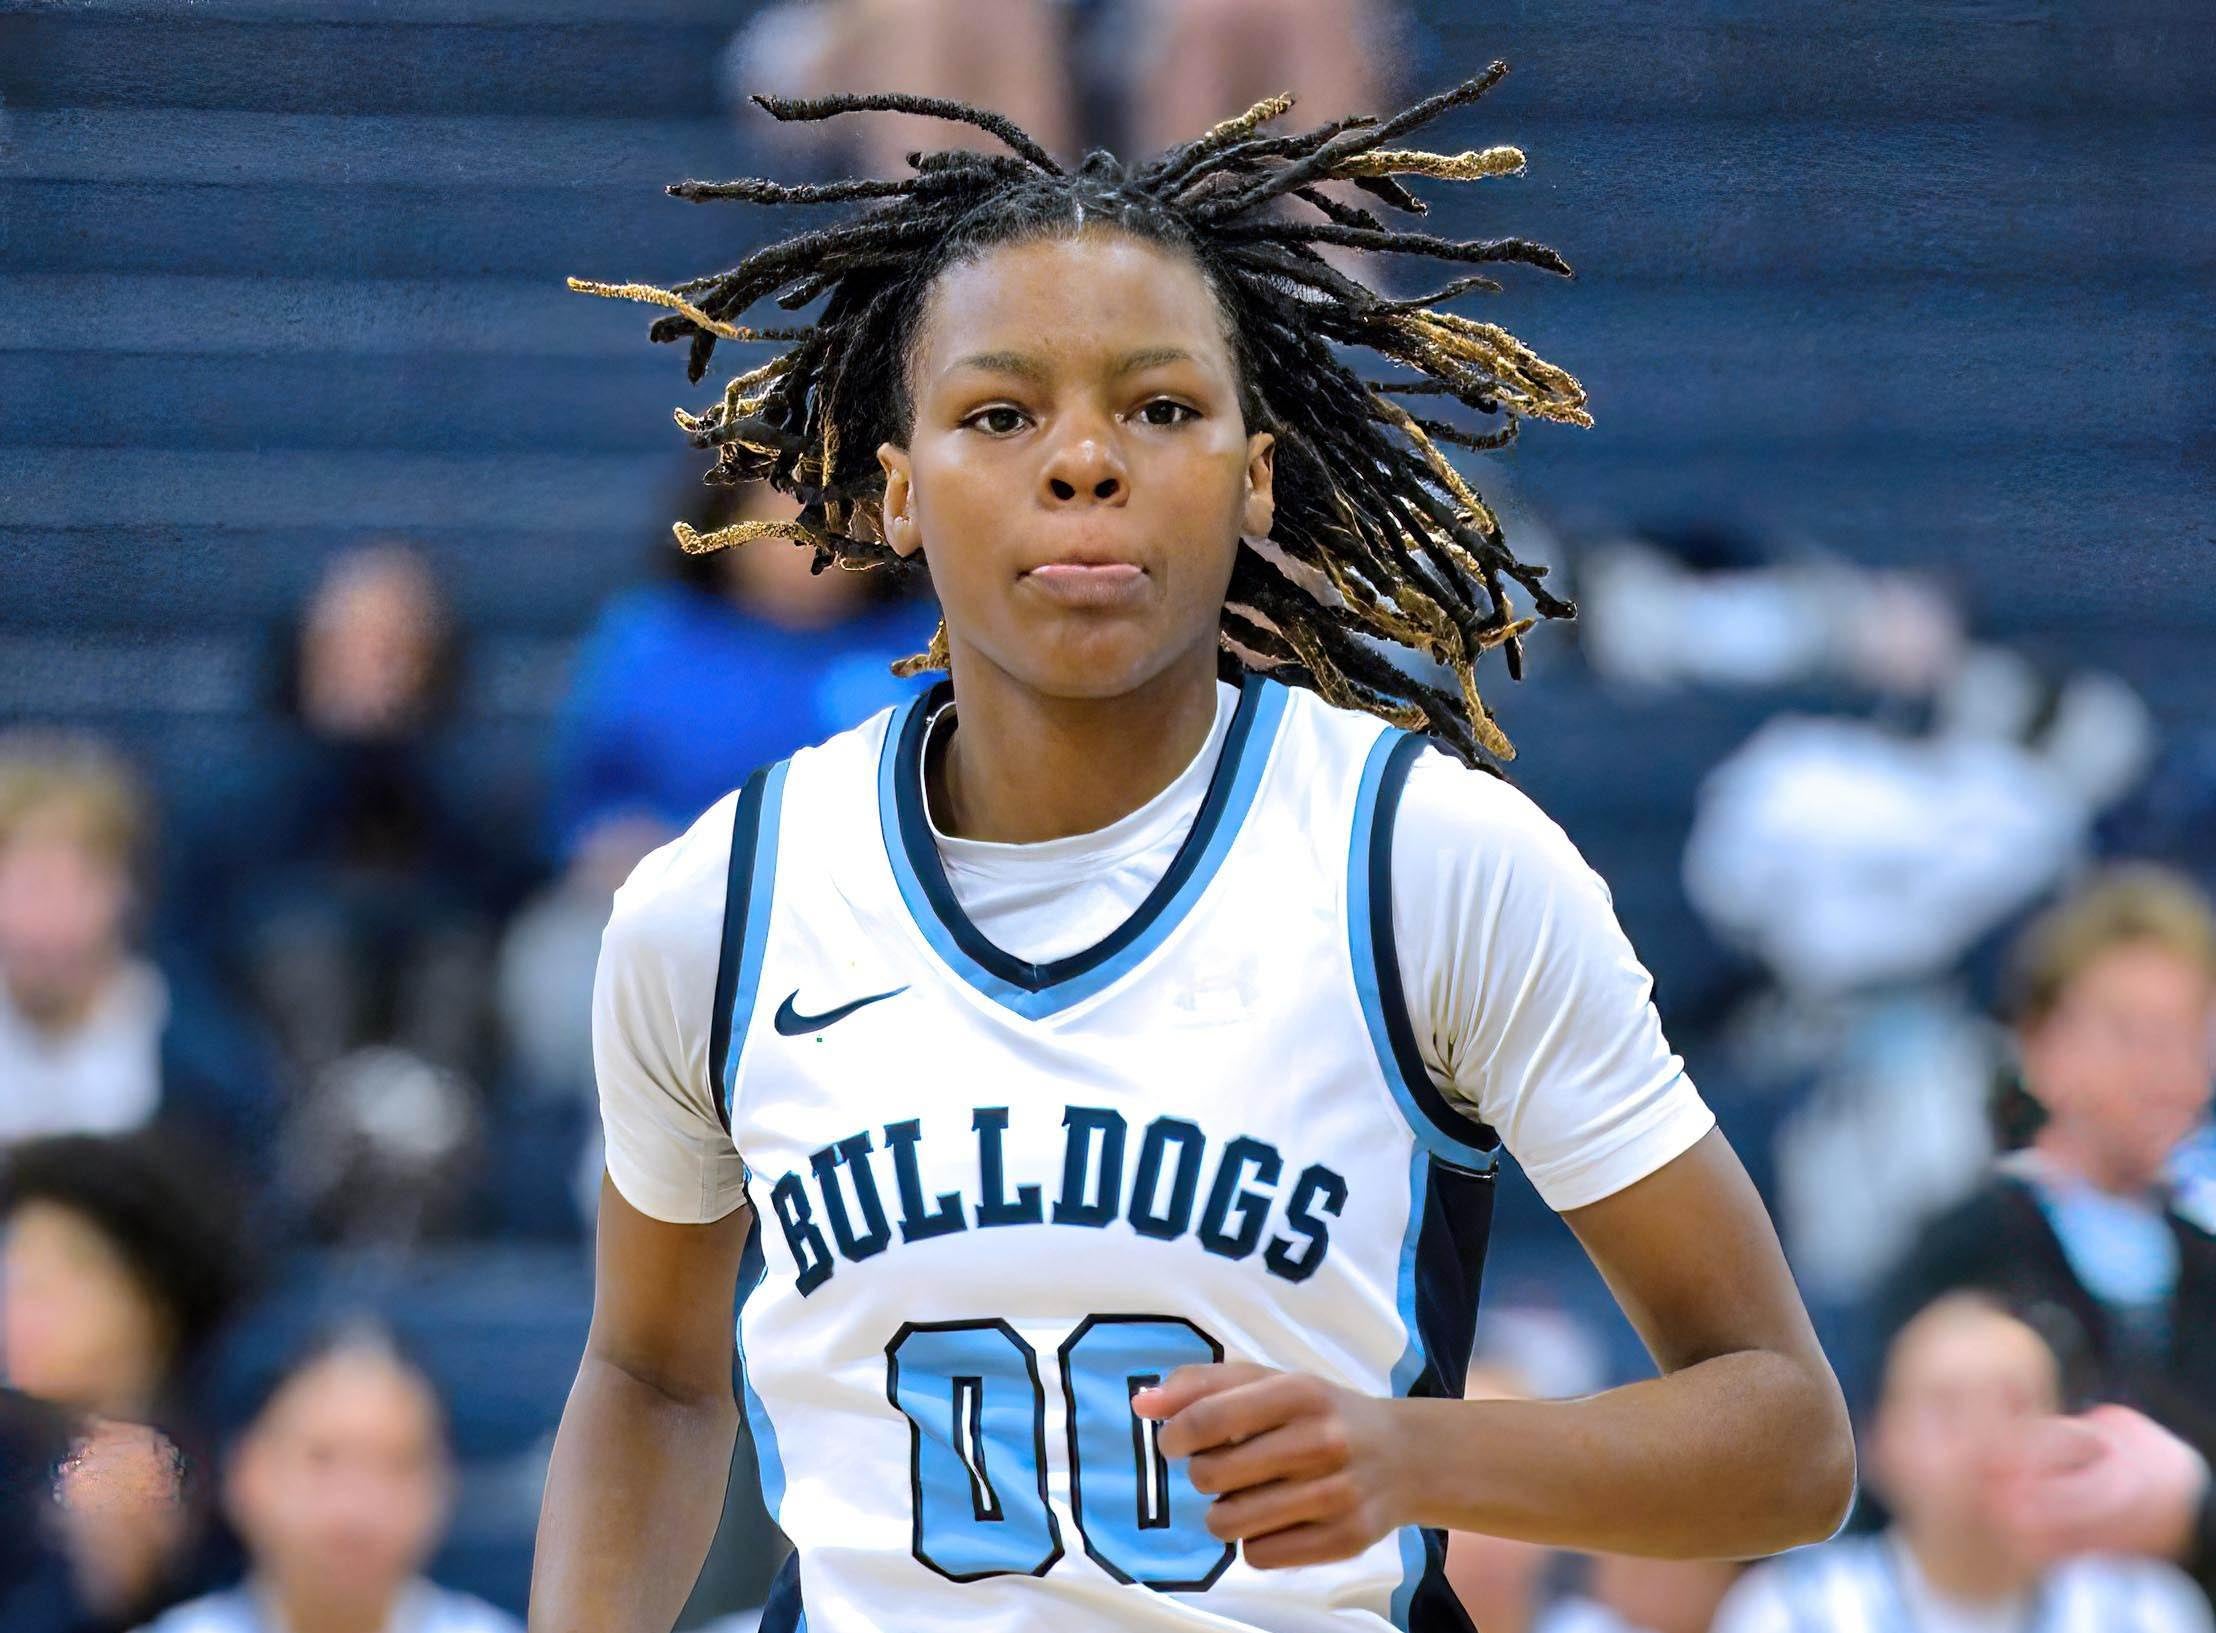 Kaniya Boyd helped Centennial to a Nevada 5A title and was named the MaxPreps Nevada Player of the Year. (Photo: Jules Karney)